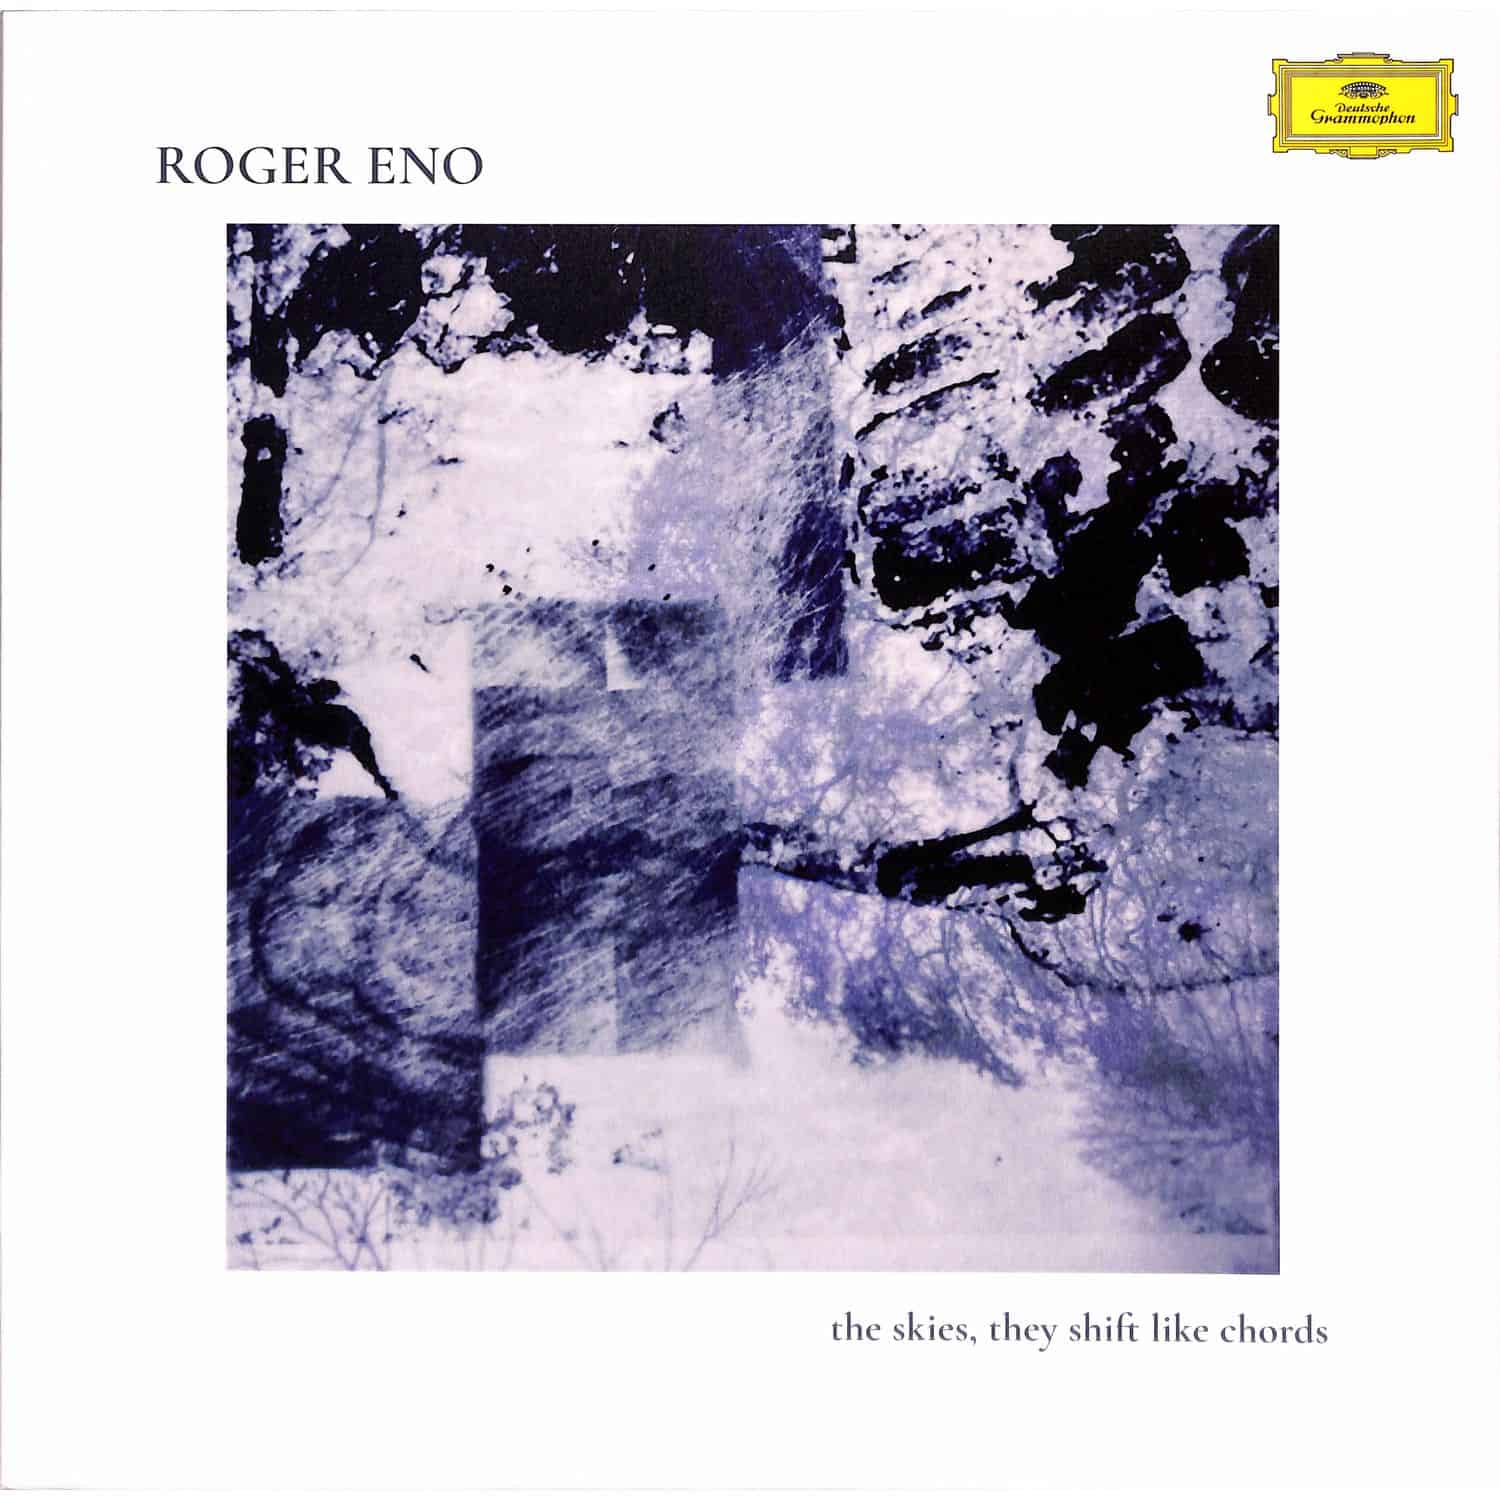 Roger Eno - THE SKIES, THEY SHIFT LIKE CHORDS 